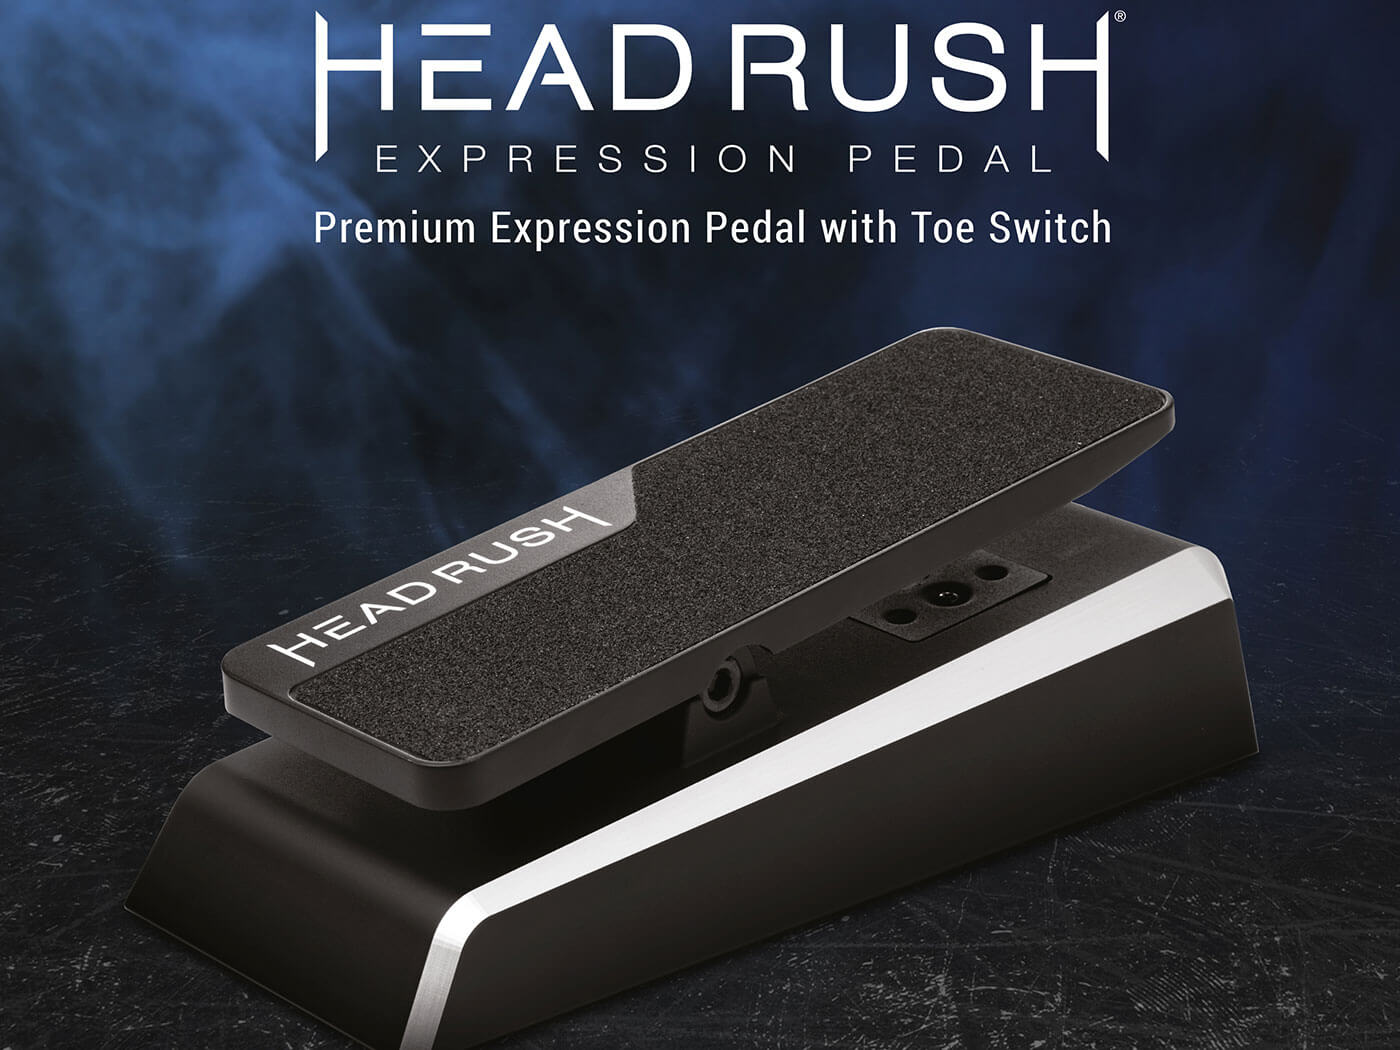 The HeadRush Expression Pedal